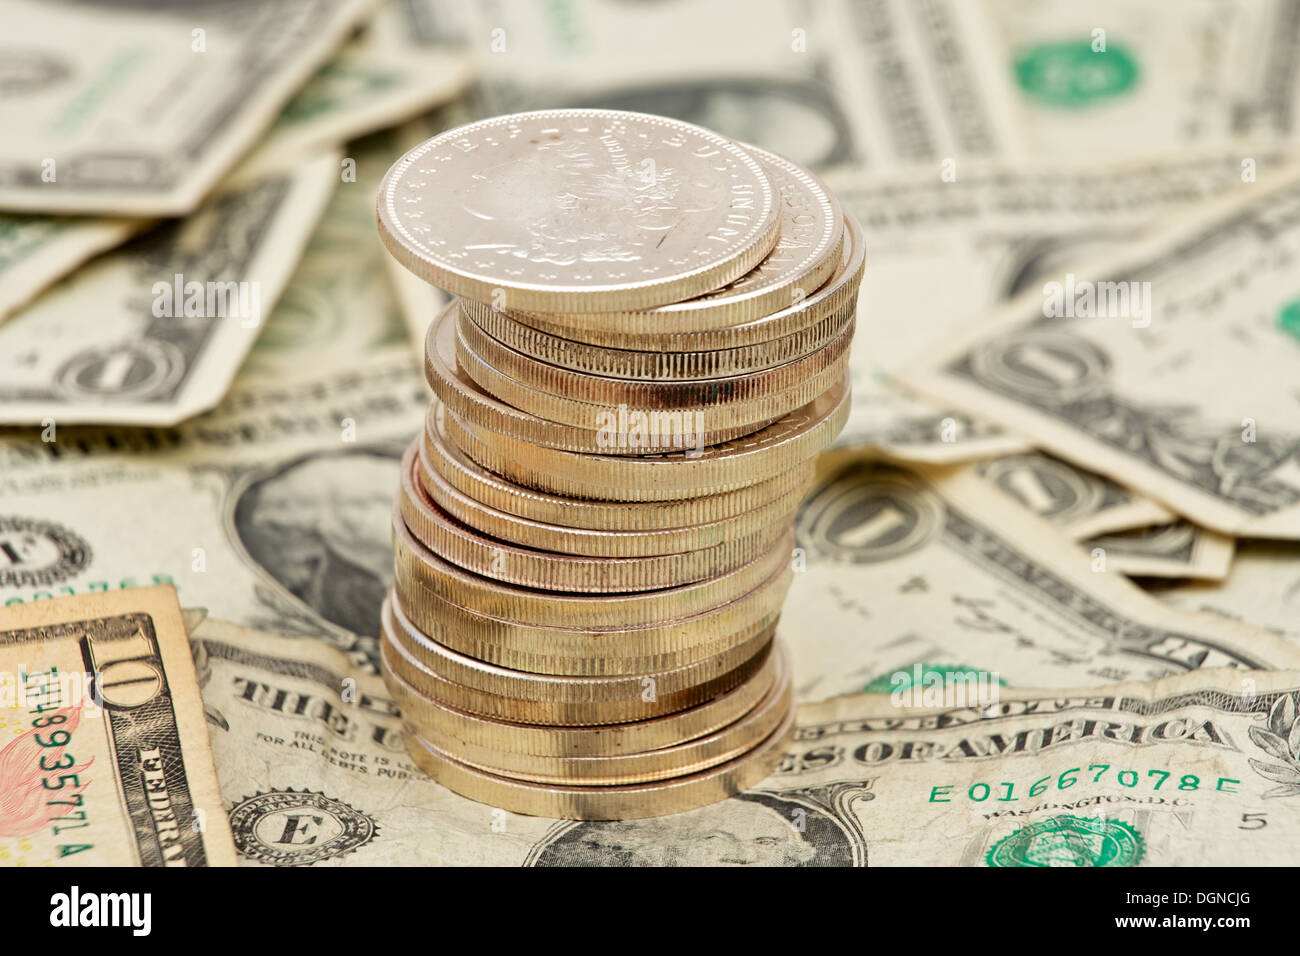 Silver Coins Stacked Up On Top Of A Pile Of Money Stock Photo 61936520